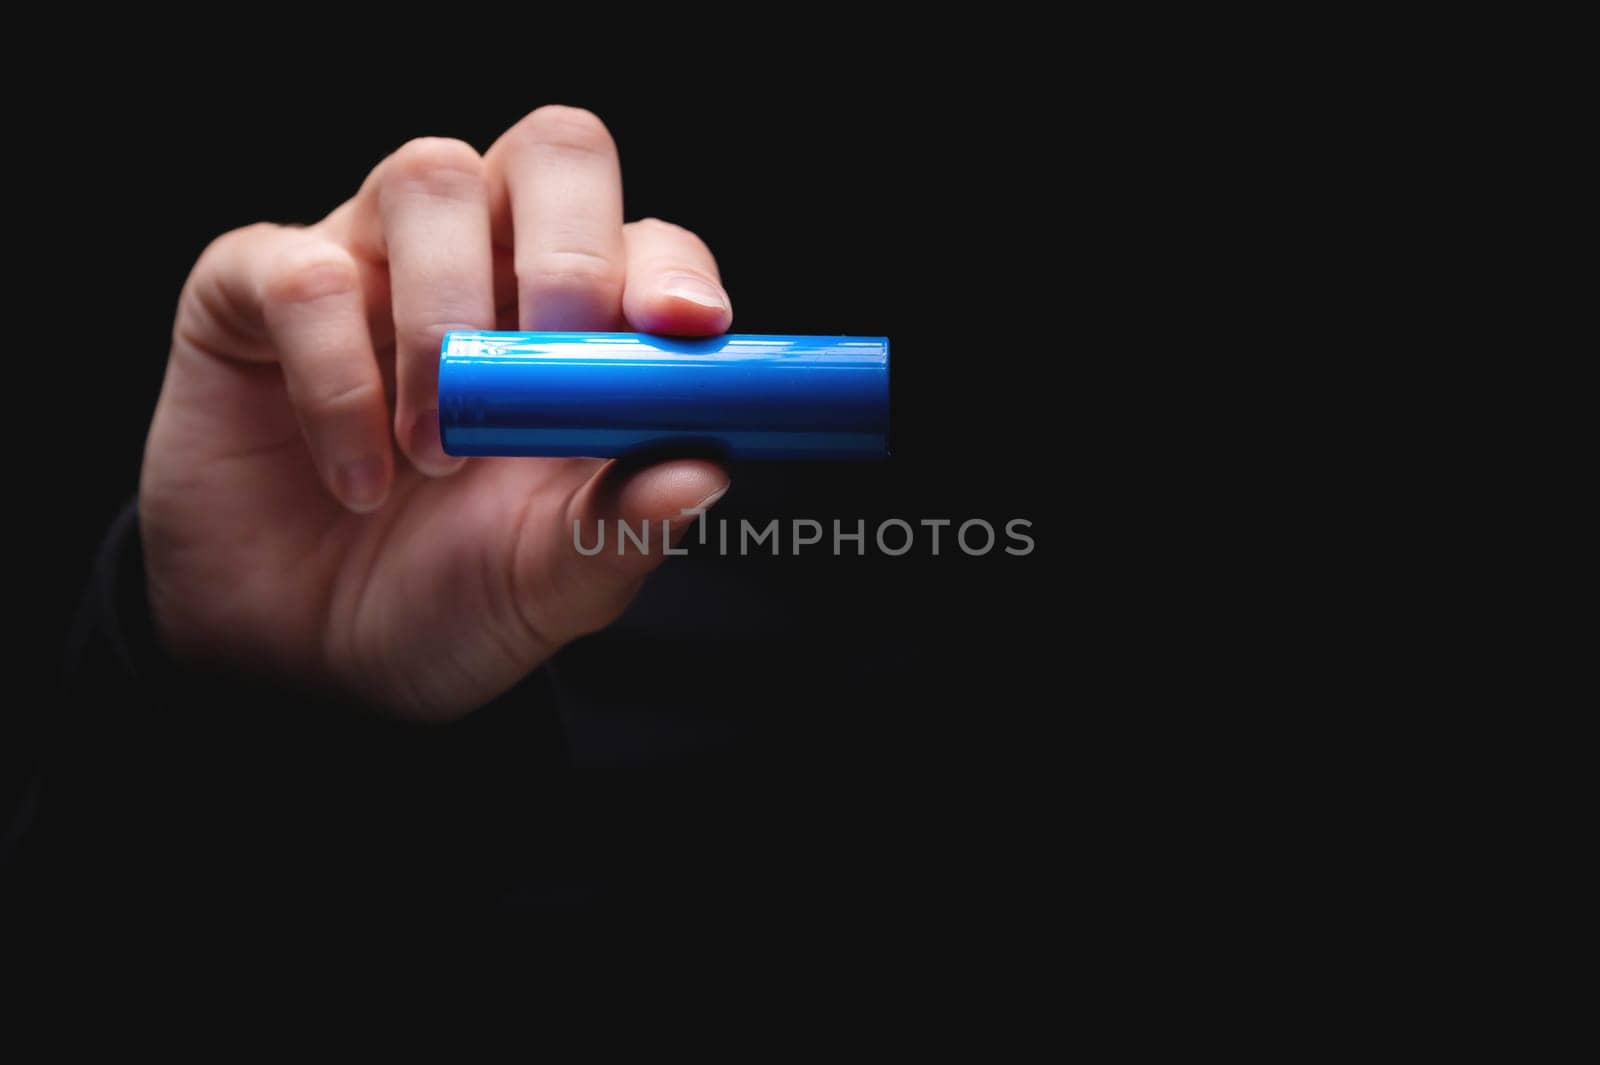 Lithium-ion battery for power in a human hand, on a black background. Woman's hand showing a battery, close-up, mockup.